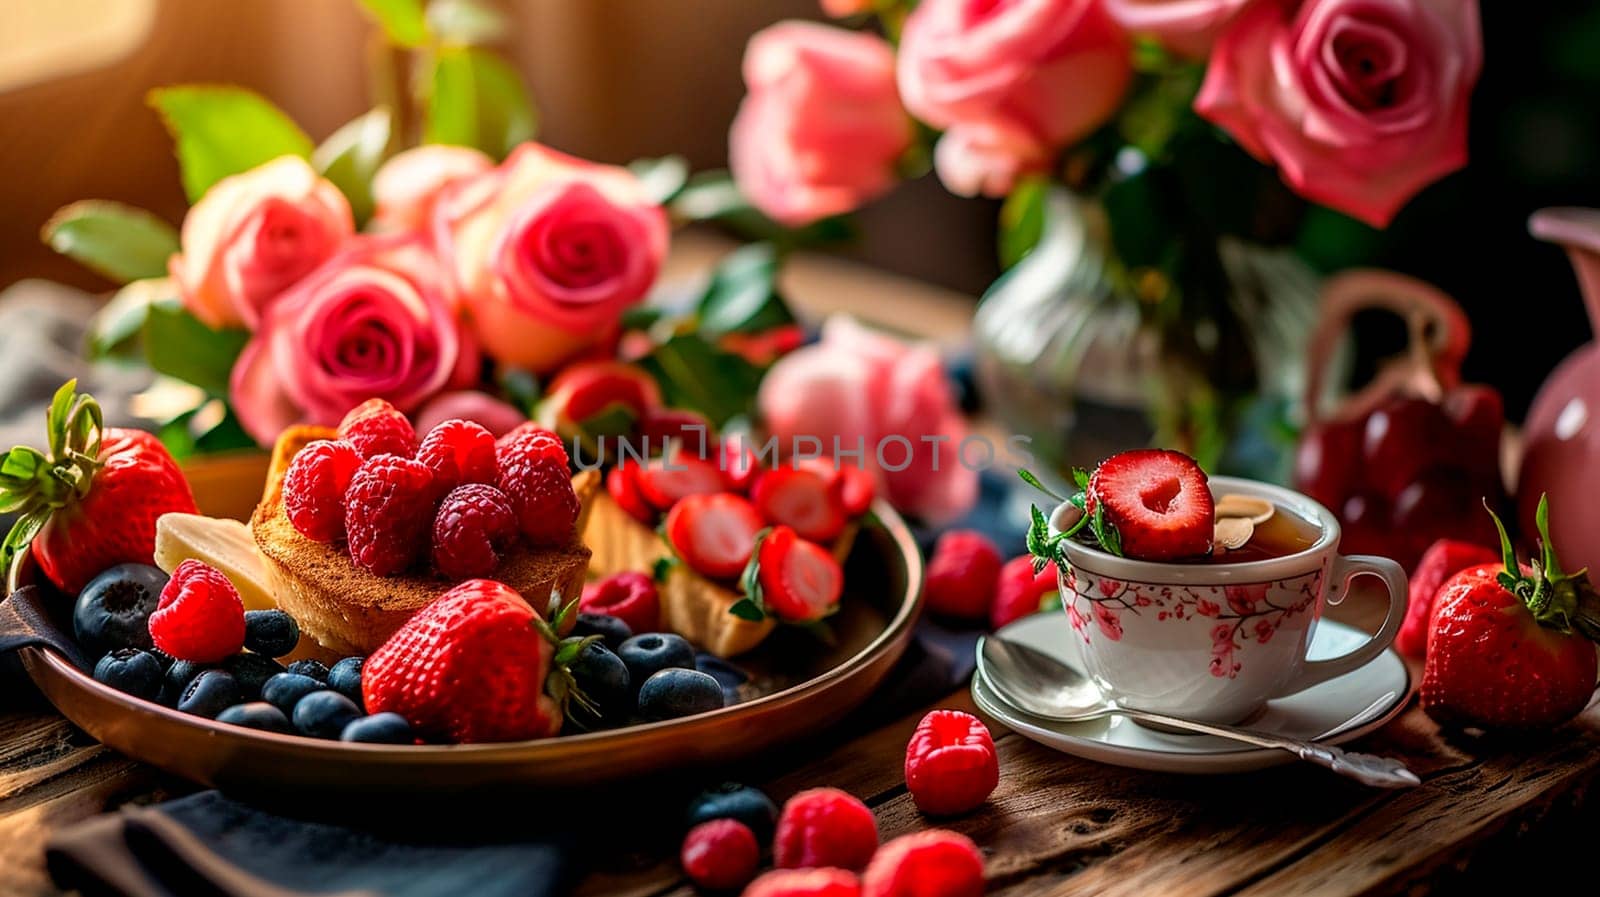 Beautiful breakfast with flowers for Valentine's Day. Selective focus. Food.